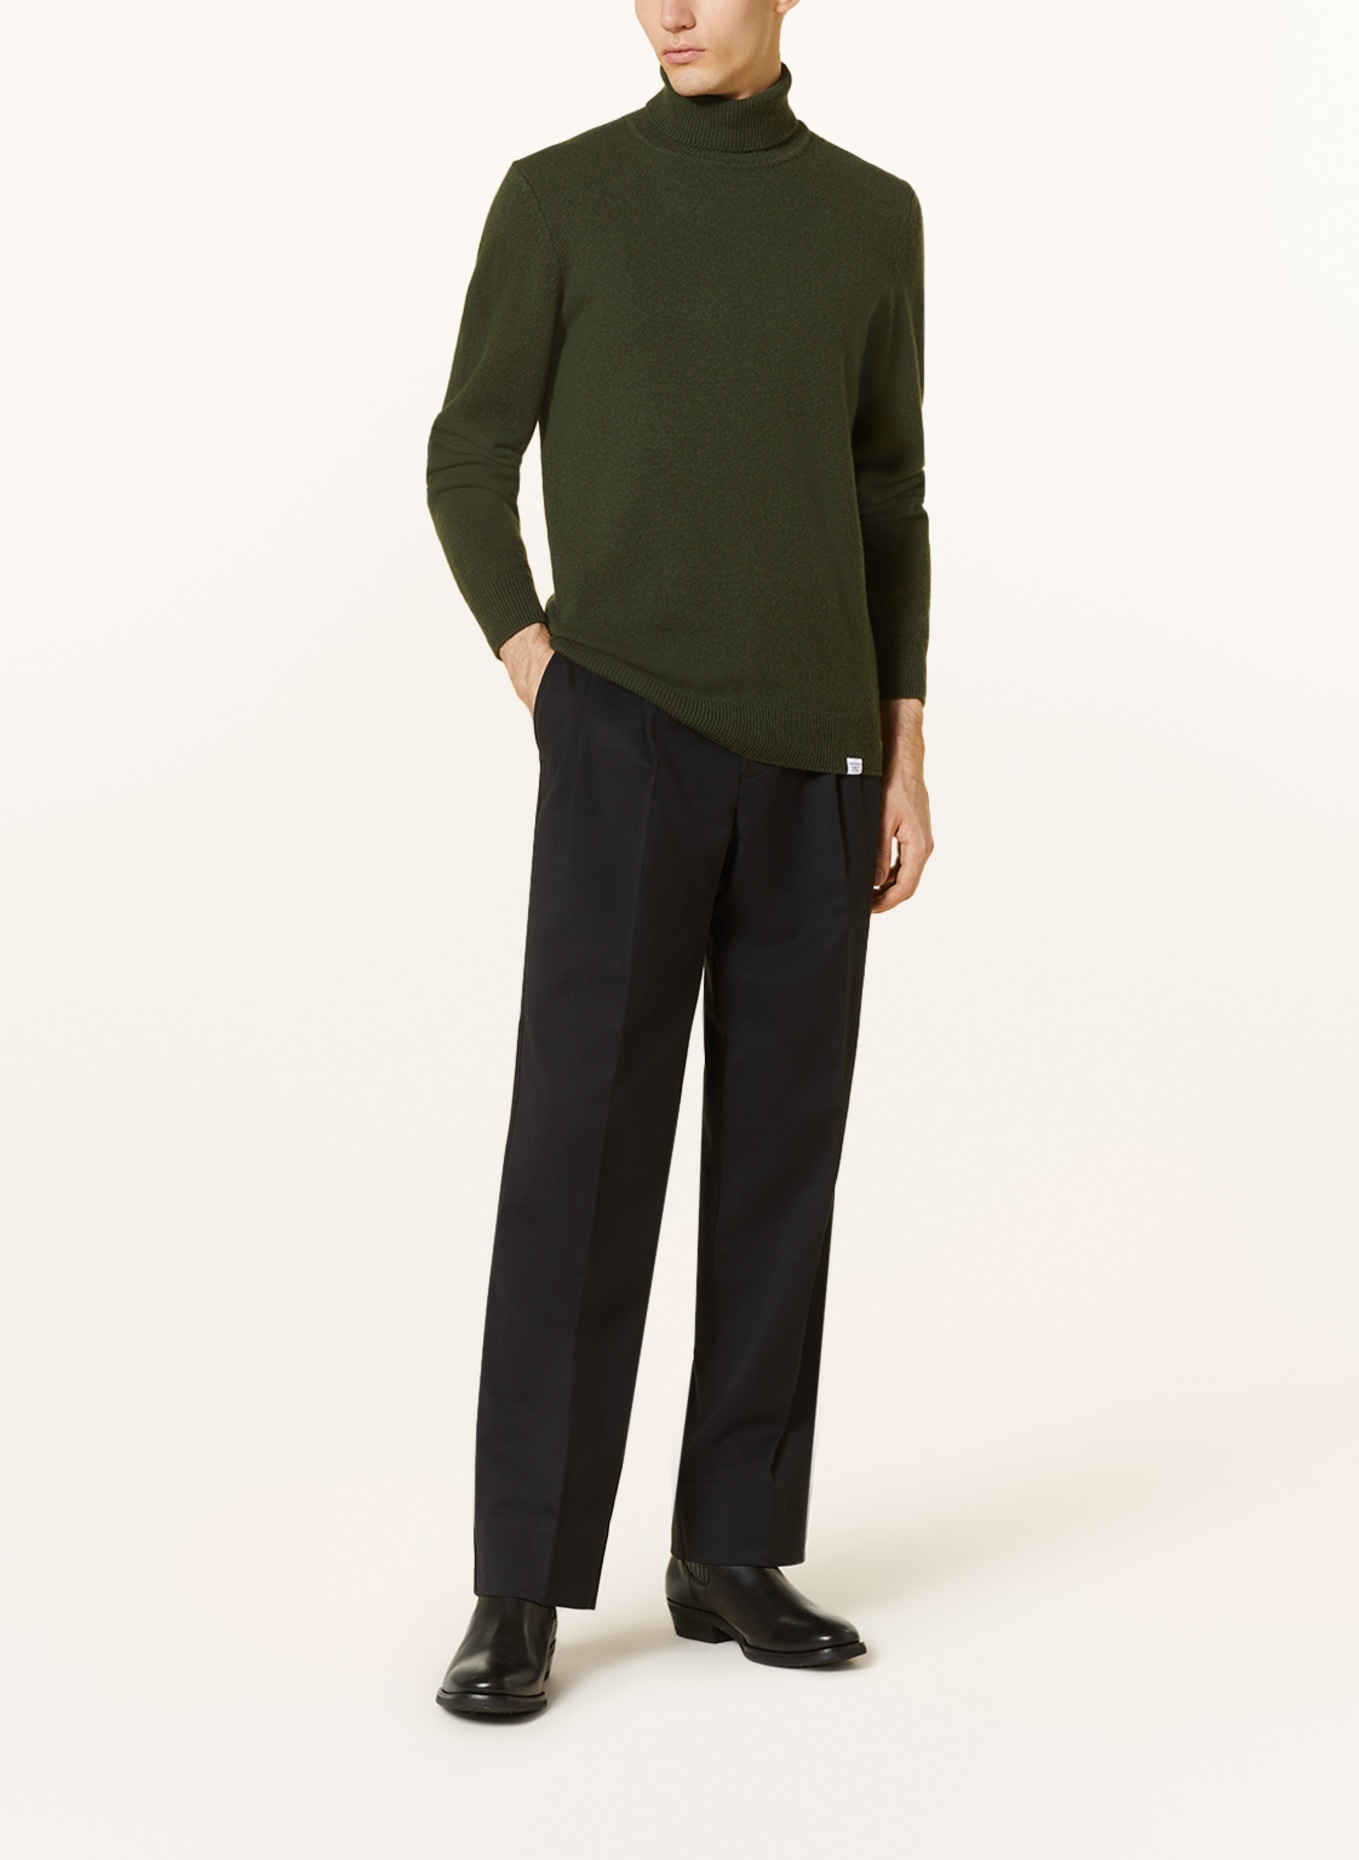 NORSE PROJECTS Turtleneck sweater KIRK made of merino wool, Color: GREEN (Image 2)